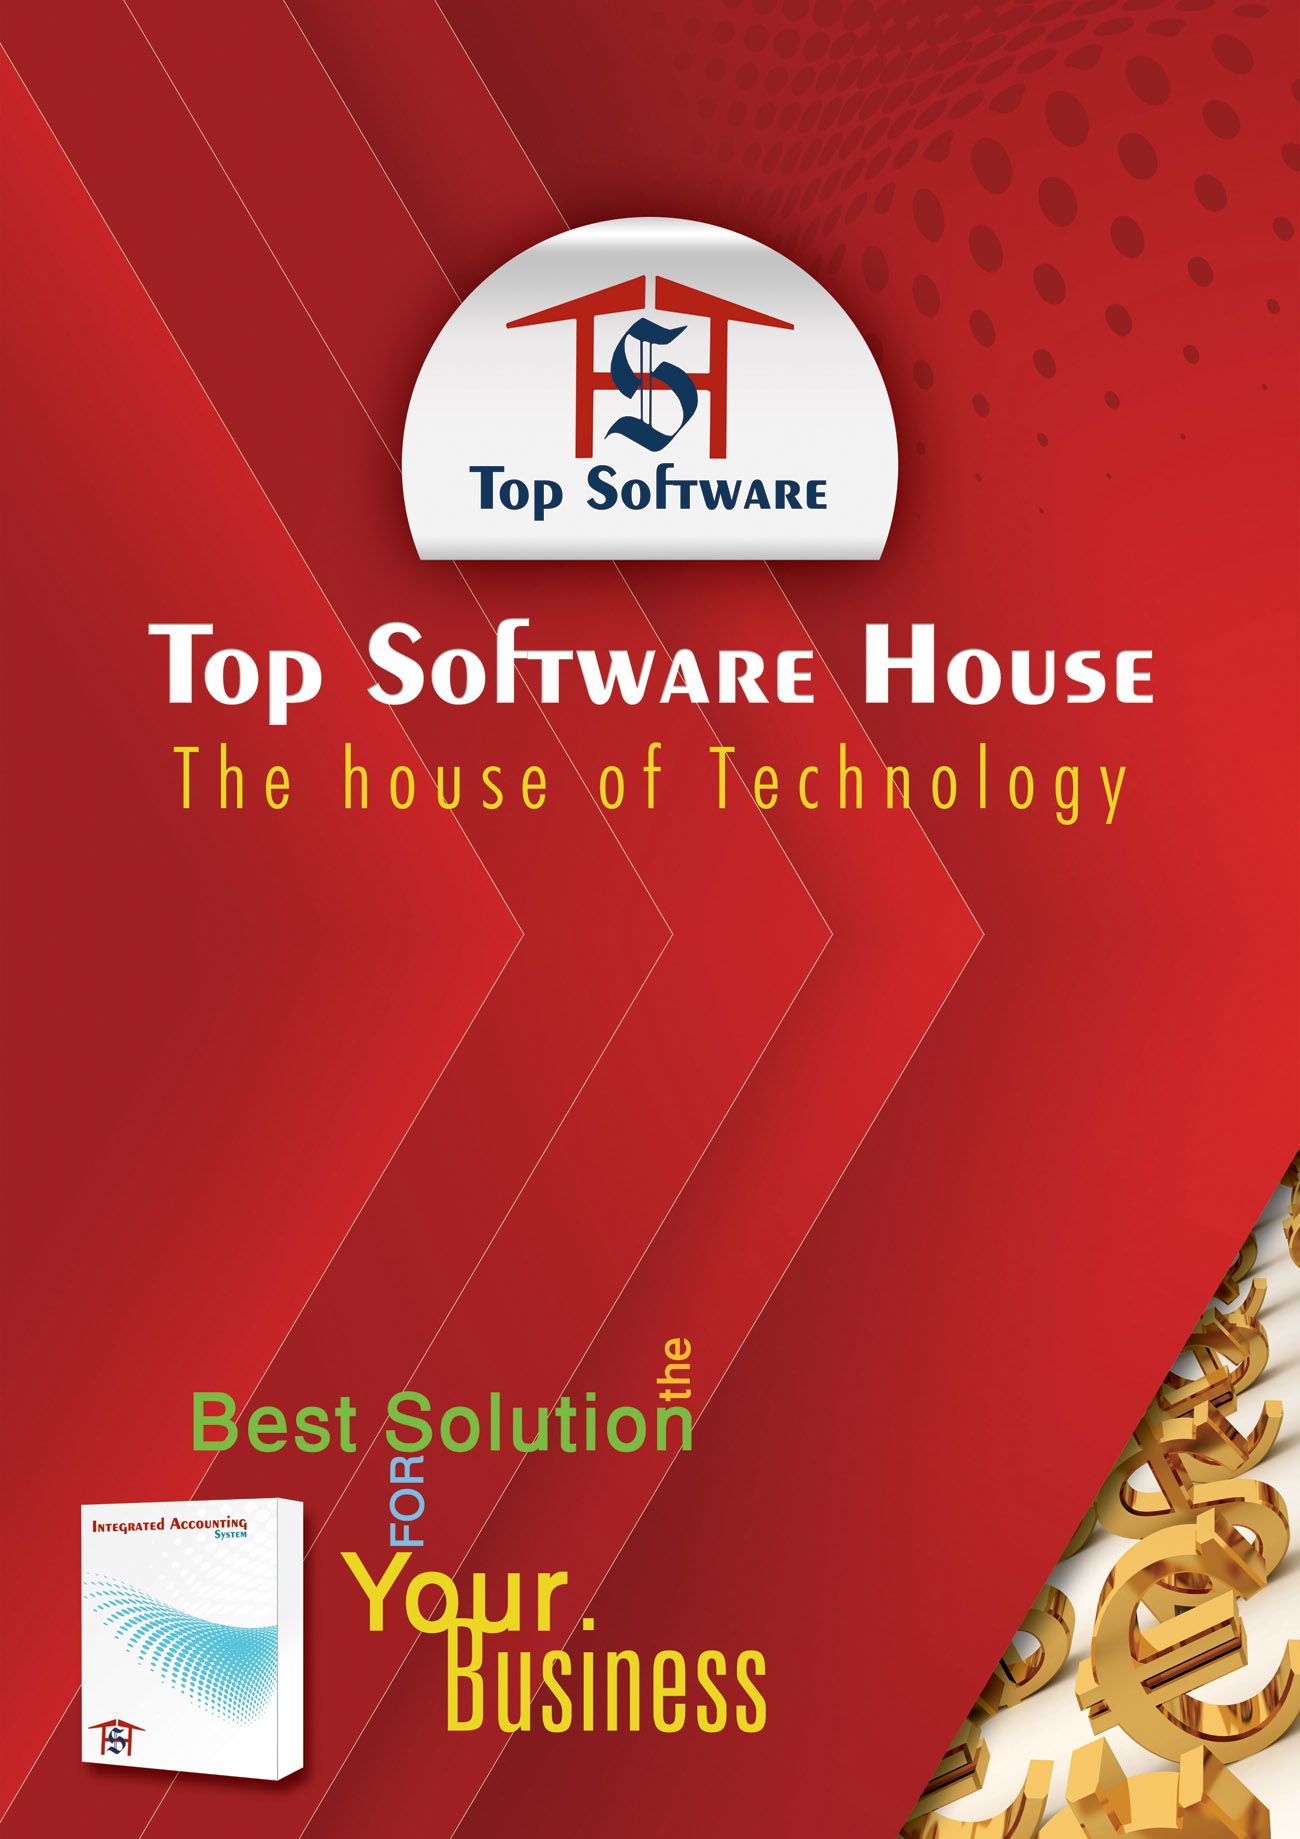 Top Software House